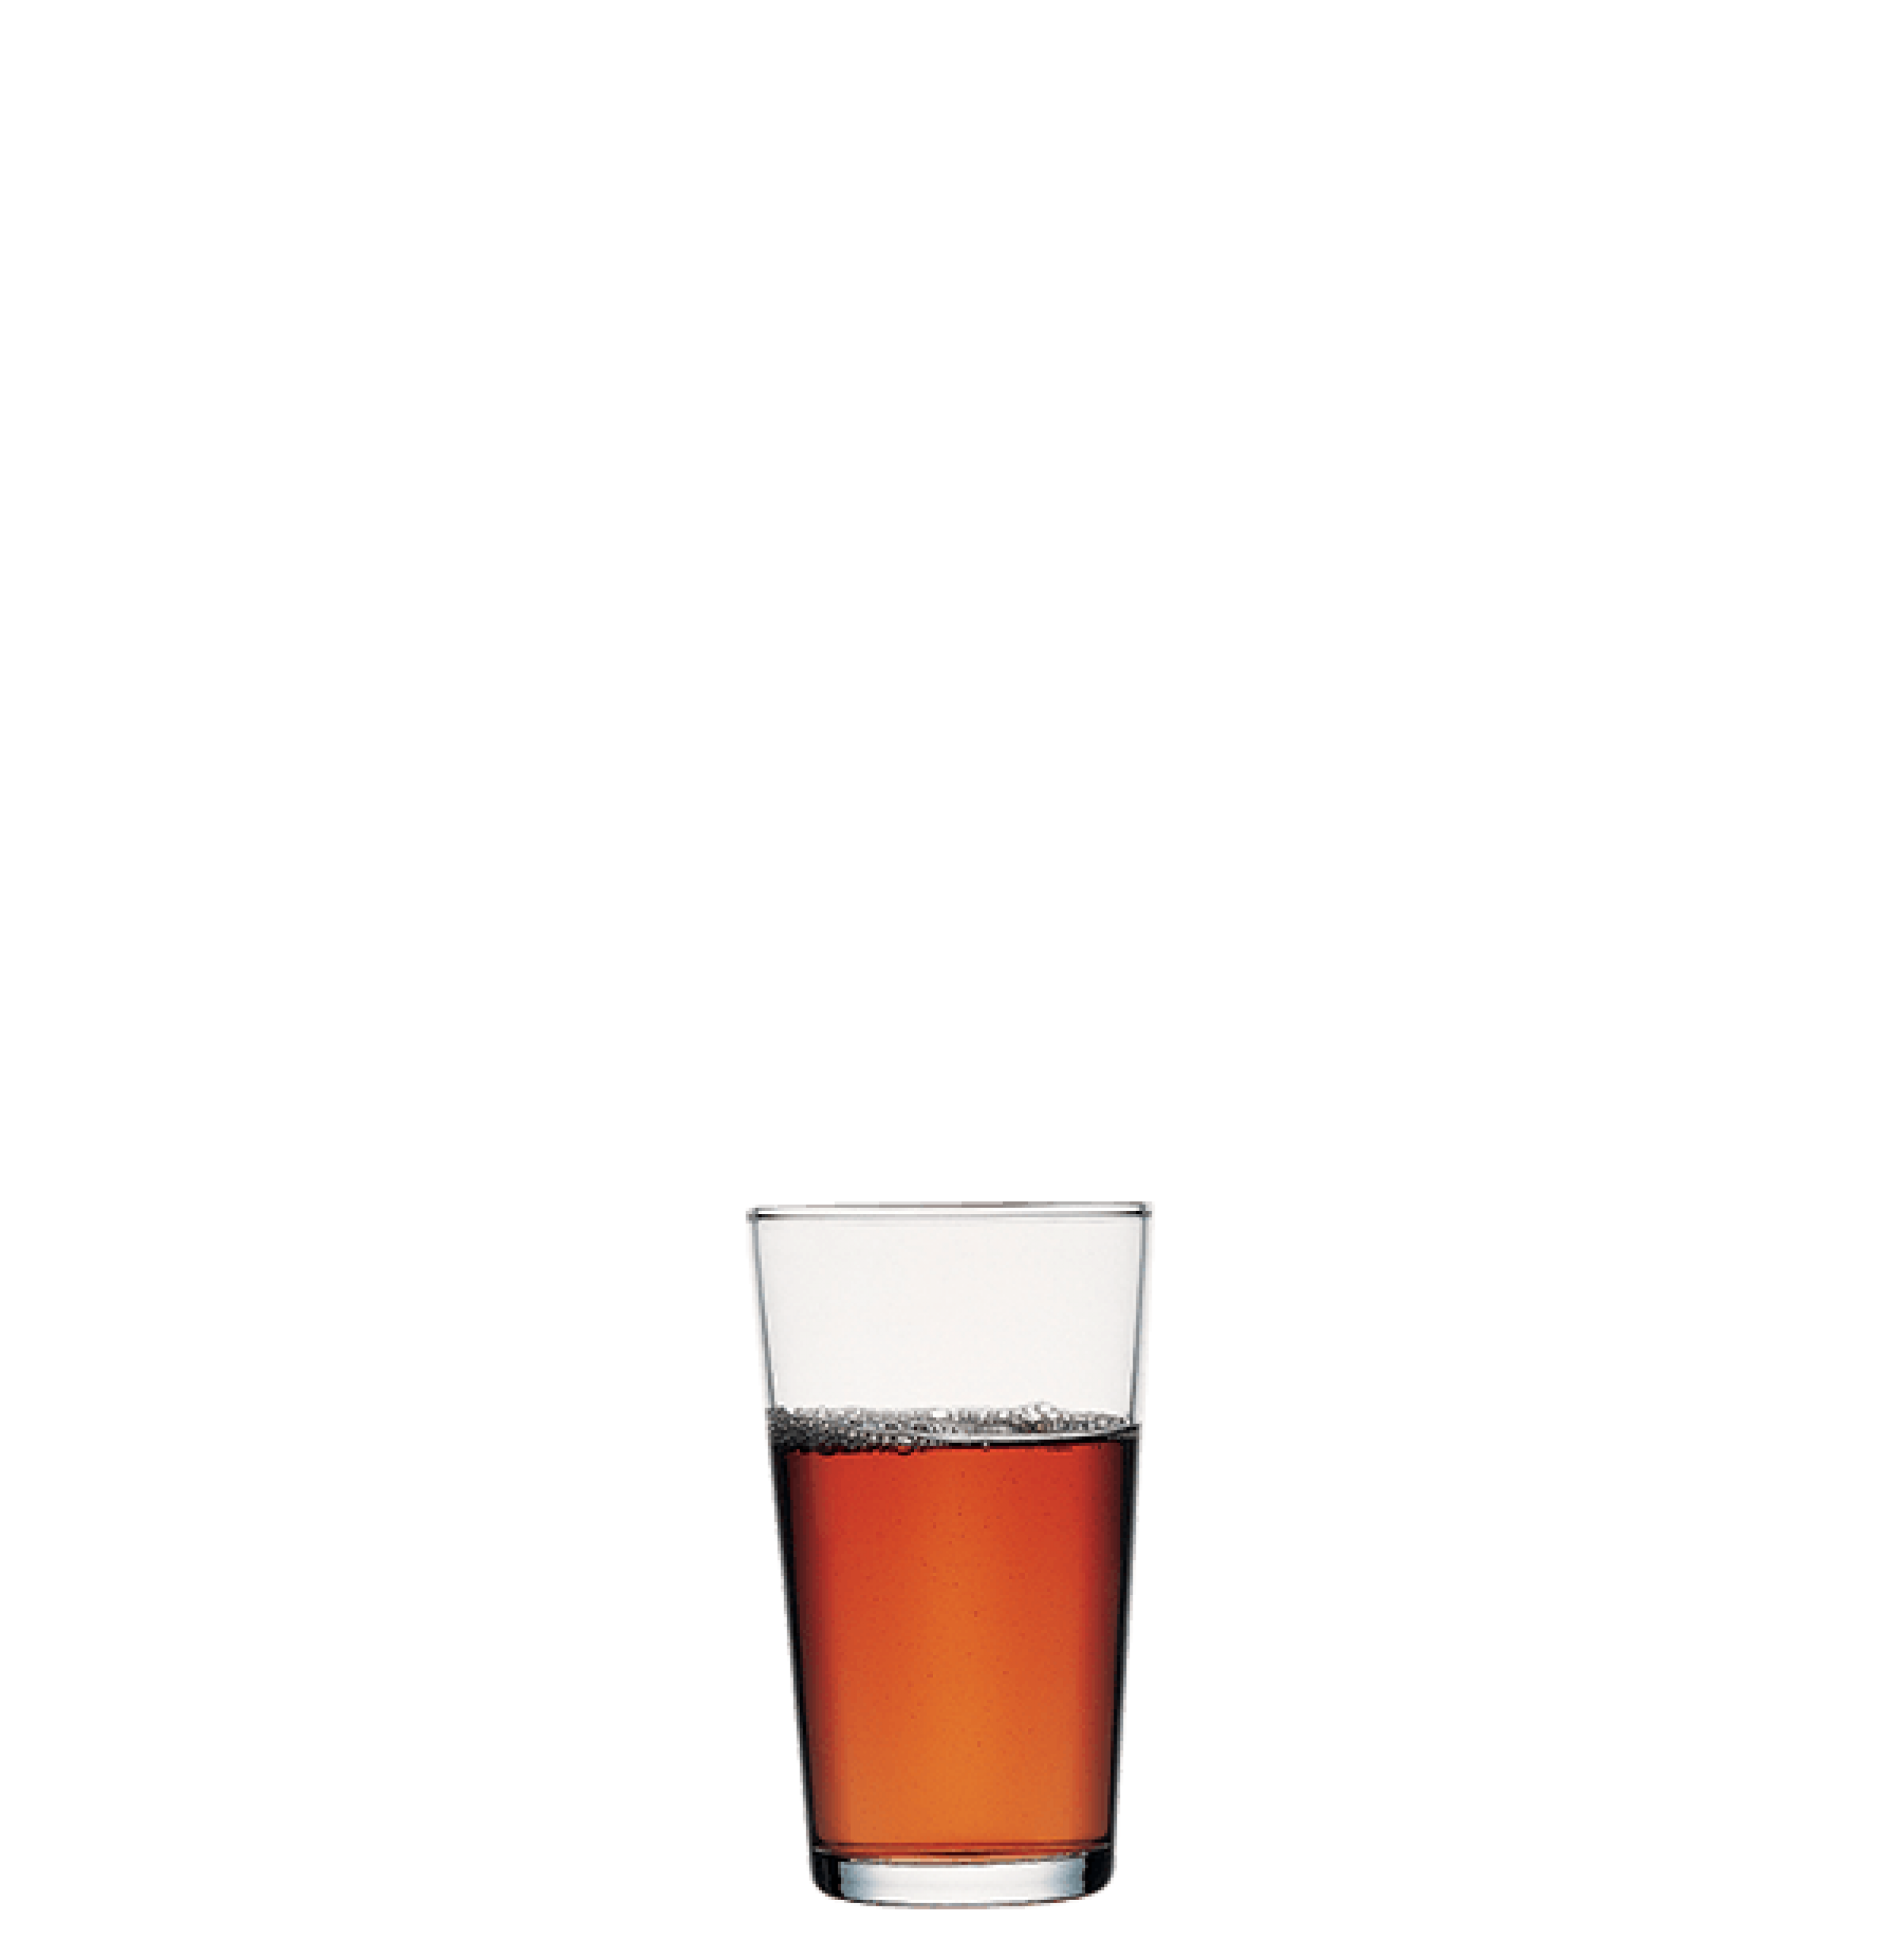 CONICAL 42387 - BEER